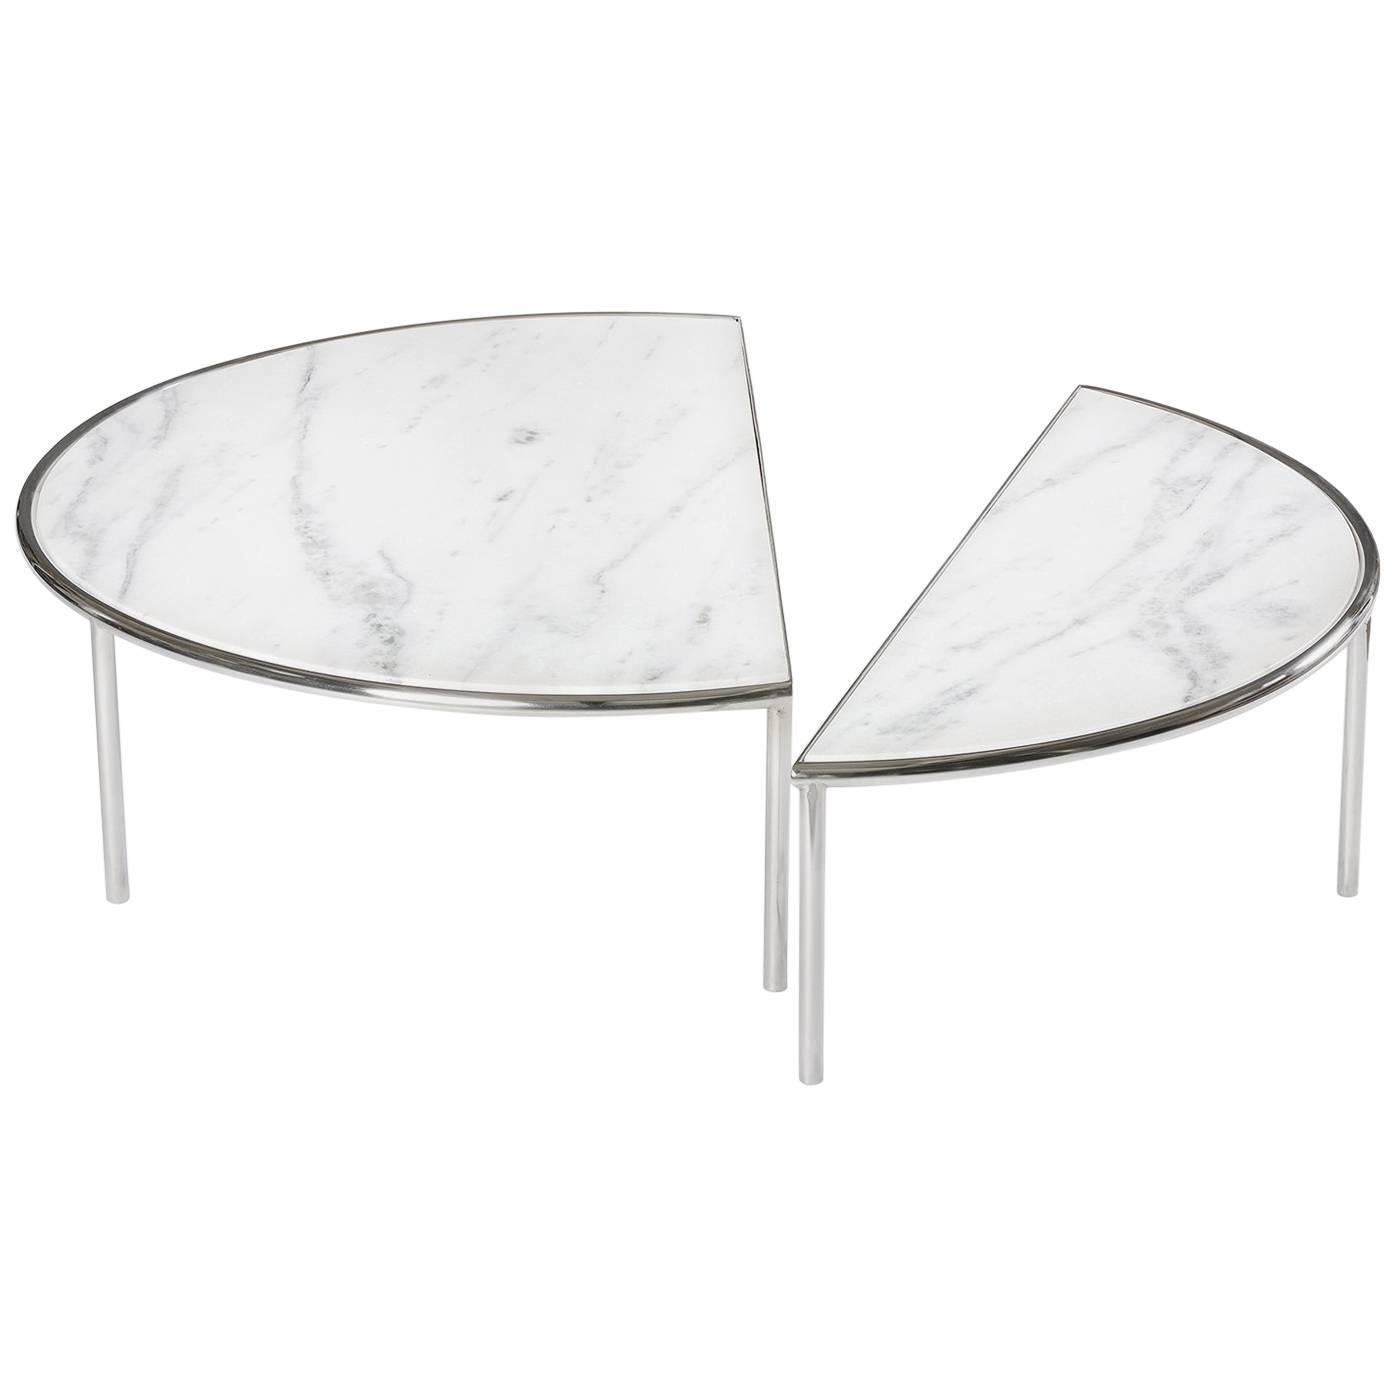 Contemporary Split Center Table by RAIN in Stainless Steel and White Marble For Sale